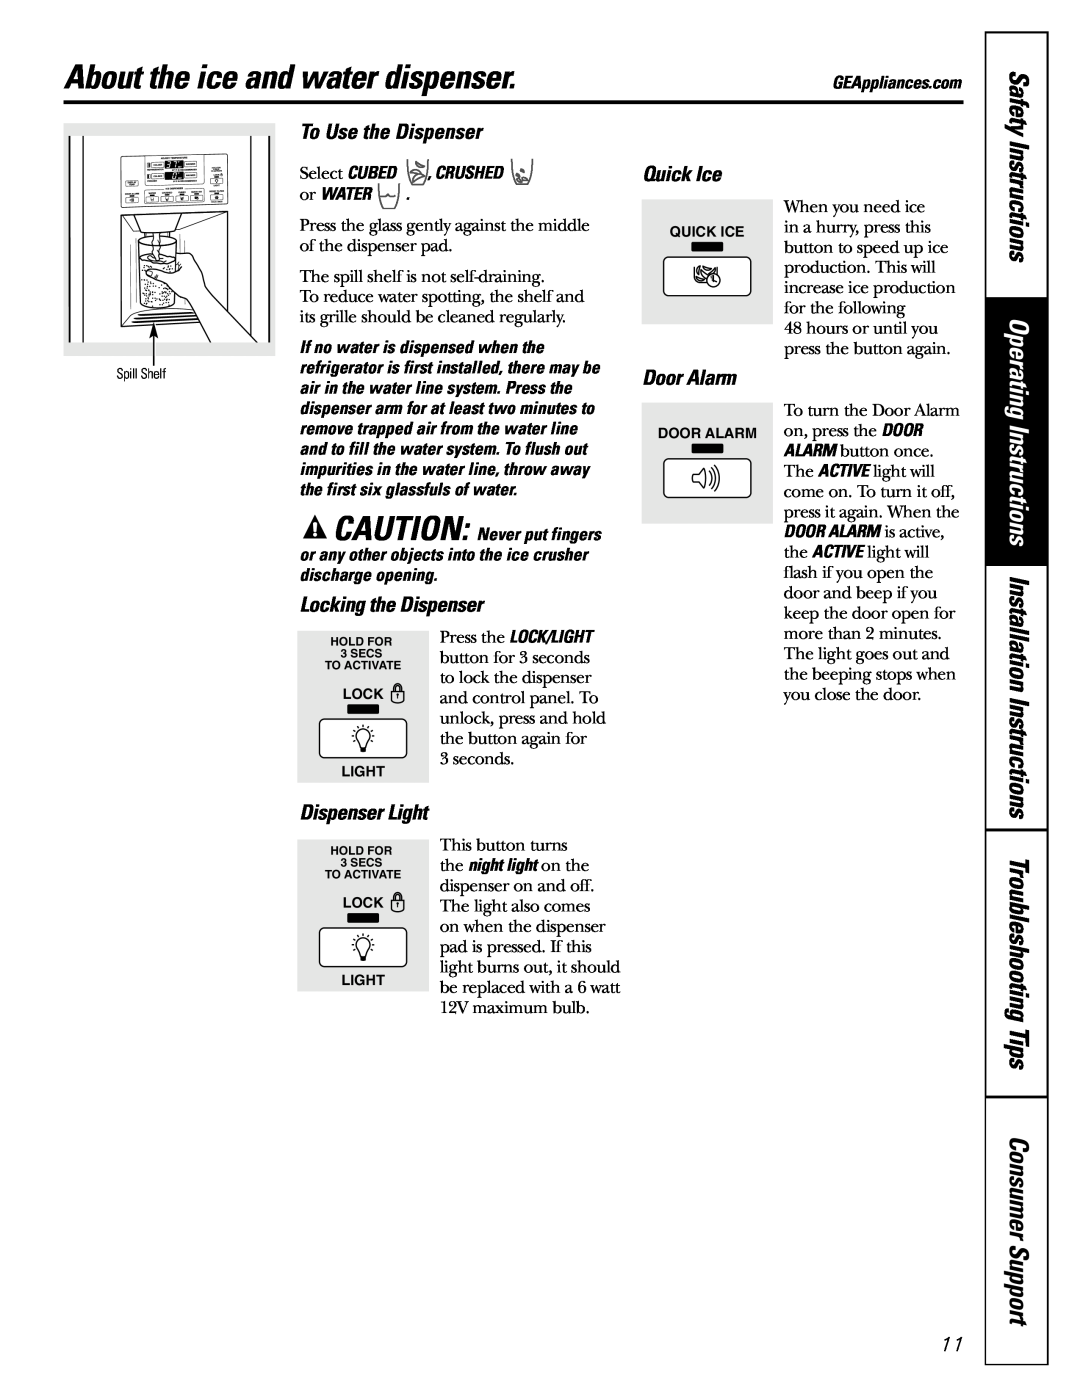 GE 48, 42 About the ice and water dispenser, Instructions Operating Instructions, Troubleshooting Tips Consumer Support 